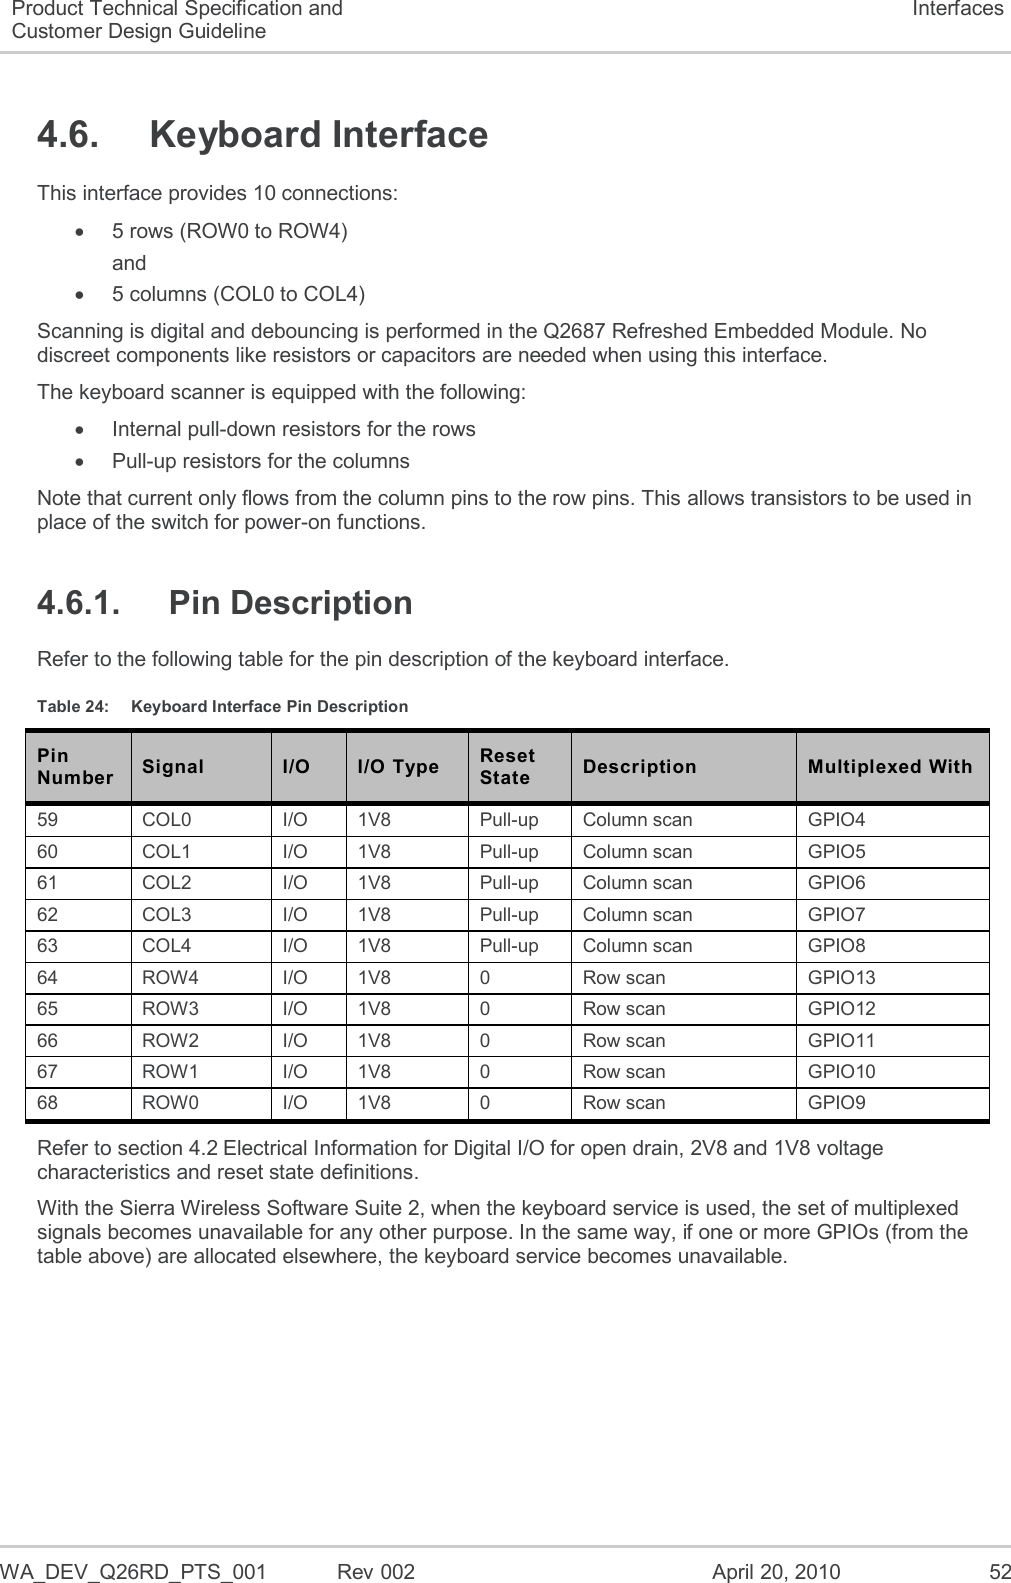  WA_DEV_Q26RD_PTS_001  Rev 002  April 20, 2010 52 Product Technical Specification and Customer Design Guideline Interfaces 4.6.  Keyboard Interface This interface provides 10 connections:   5 rows (ROW0 to ROW4) and    5 columns (COL0 to COL4) Scanning is digital and debouncing is performed in the Q2687 Refreshed Embedded Module. No discreet components like resistors or capacitors are needed when using this interface. The keyboard scanner is equipped with the following:   Internal pull-down resistors for the rows   Pull-up resistors for the columns Note that current only flows from the column pins to the row pins. This allows transistors to be used in place of the switch for power-on functions. 4.6.1.  Pin Description Refer to the following table for the pin description of the keyboard interface. Table 24:  Keyboard Interface Pin Description Pin Number Signal I/O I/O Type Reset State Description Multiplexed With 59 COL0 I/O 1V8 Pull-up Column scan GPIO4 60 COL1 I/O 1V8 Pull-up Column scan GPIO5 61 COL2 I/O 1V8 Pull-up Column scan GPIO6 62 COL3 I/O 1V8 Pull-up Column scan GPIO7 63 COL4 I/O 1V8 Pull-up Column scan  GPIO8 64 ROW4 I/O 1V8 0 Row scan GPIO13 65 ROW3 I/O 1V8 0 Row scan GPIO12 66 ROW2 I/O 1V8 0 Row scan GPIO11 67 ROW1 I/O 1V8 0 Row scan GPIO10 68 ROW0 I/O 1V8 0 Row scan GPIO9 Refer to section 4.2 Electrical Information for Digital I/O for open drain, 2V8 and 1V8 voltage characteristics and reset state definitions. With the Sierra Wireless Software Suite 2, when the keyboard service is used, the set of multiplexed signals becomes unavailable for any other purpose. In the same way, if one or more GPIOs (from the table above) are allocated elsewhere, the keyboard service becomes unavailable. 